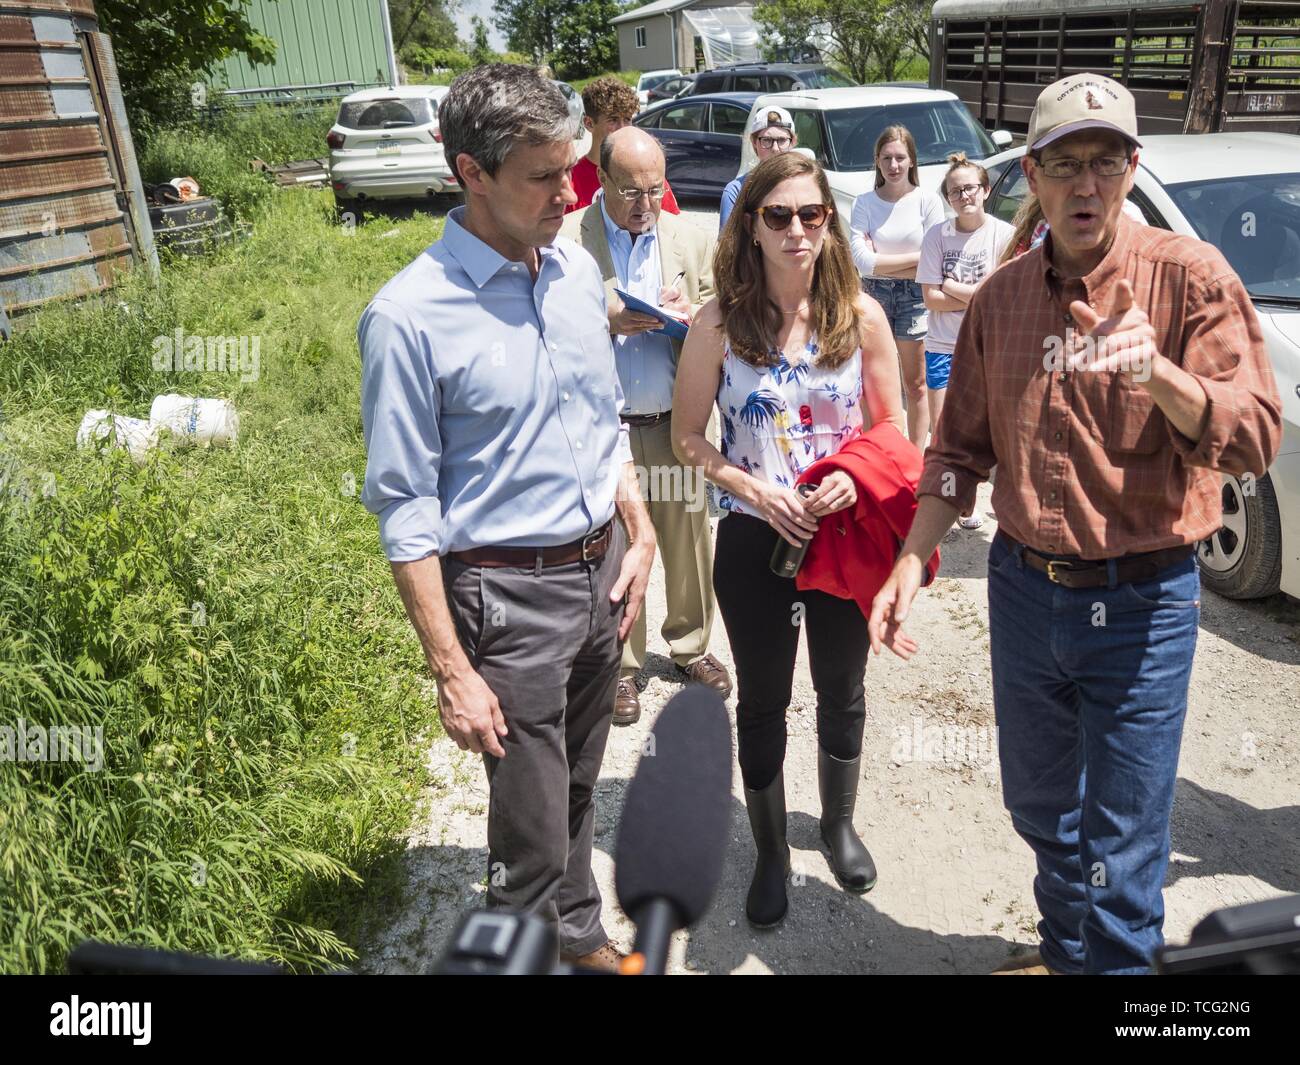 Iowa, USA. 07th June, 2019. Lacona, Iowa, USA. 7th June, 2019. BETO O'ROURKE, left, his wife, AMY O'ROURKE, and MATT RUSSELL talk while they tour Russell's farm, Coyote Run Farm. O'Rouke toured Coyote Run Farm in Lacona Friday. He talked to Russell, the farm's co-owner, about the impact of President Trump's tariffs against China and proposed tariff's against Mexico on Iowa farmers and how climate change was changing American agriculture. O'Rourke, running to be the 2020 Democratic nominee for the US Presidency, has made climate change a central part of his campaign. Credit: ZUMA Press, Inc./Al Stock Photo